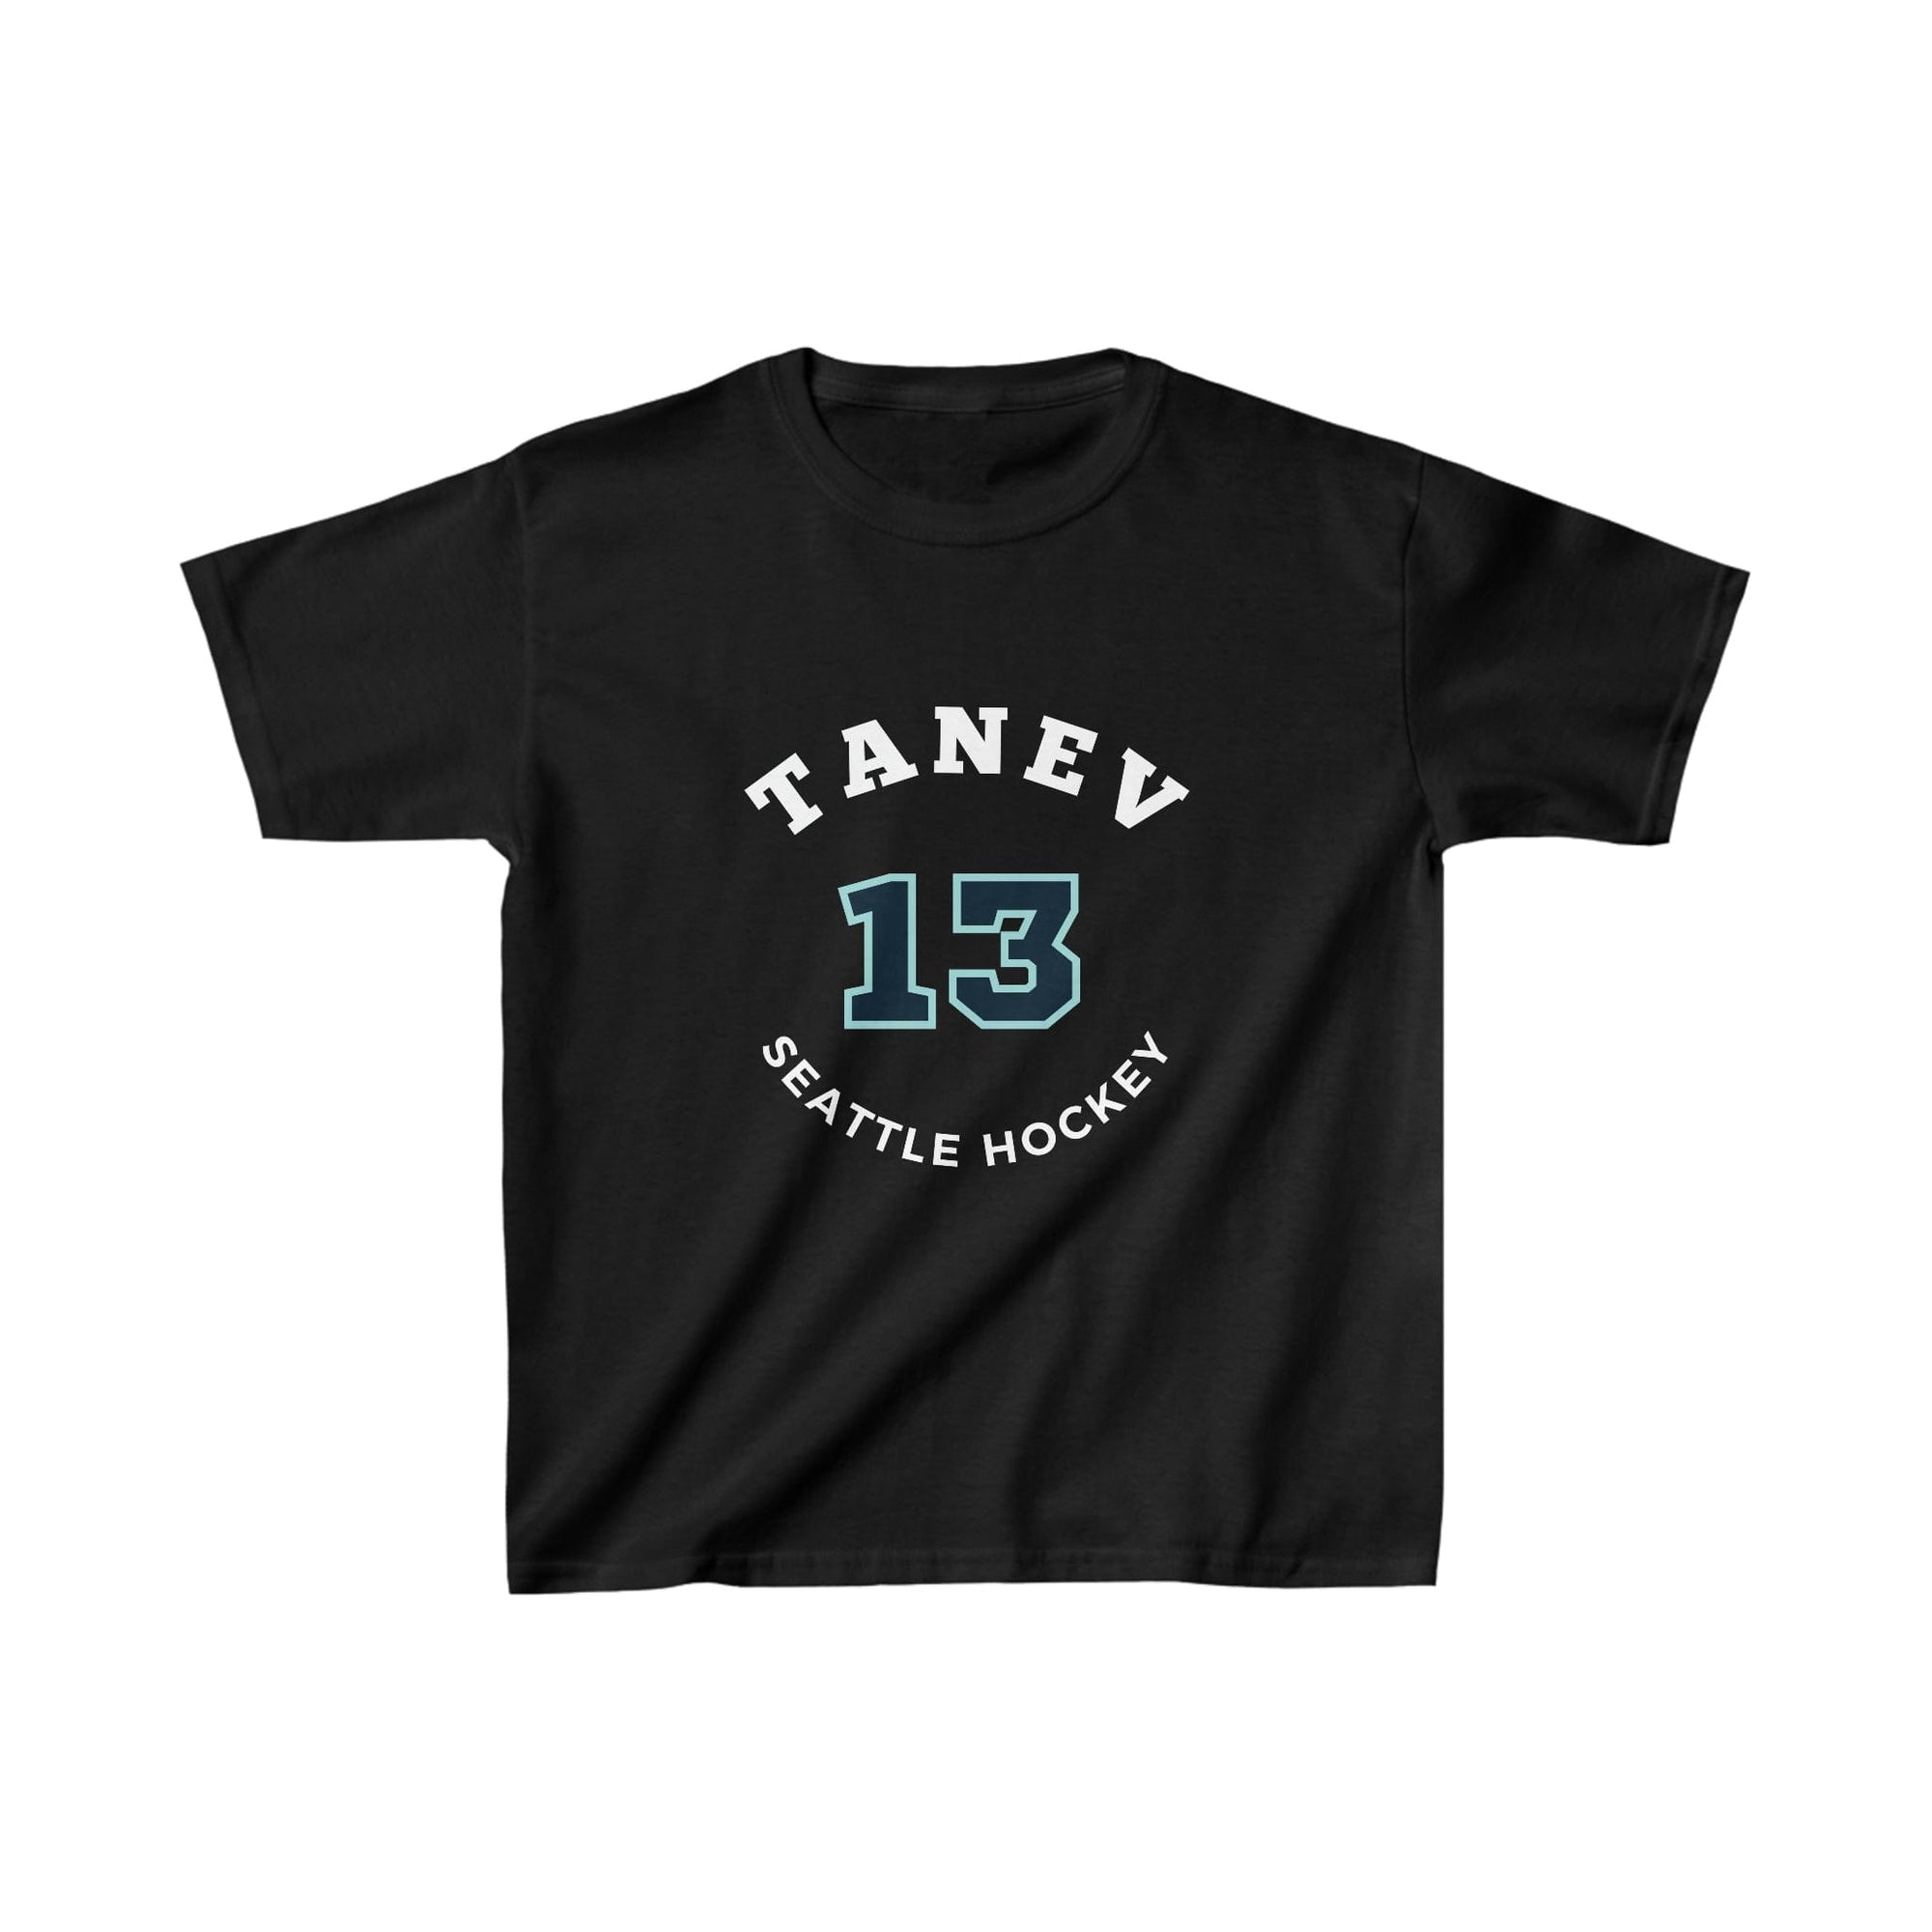 Kids clothes Tanev 13 Seattle Hockey Number Arch Design Kids Tee